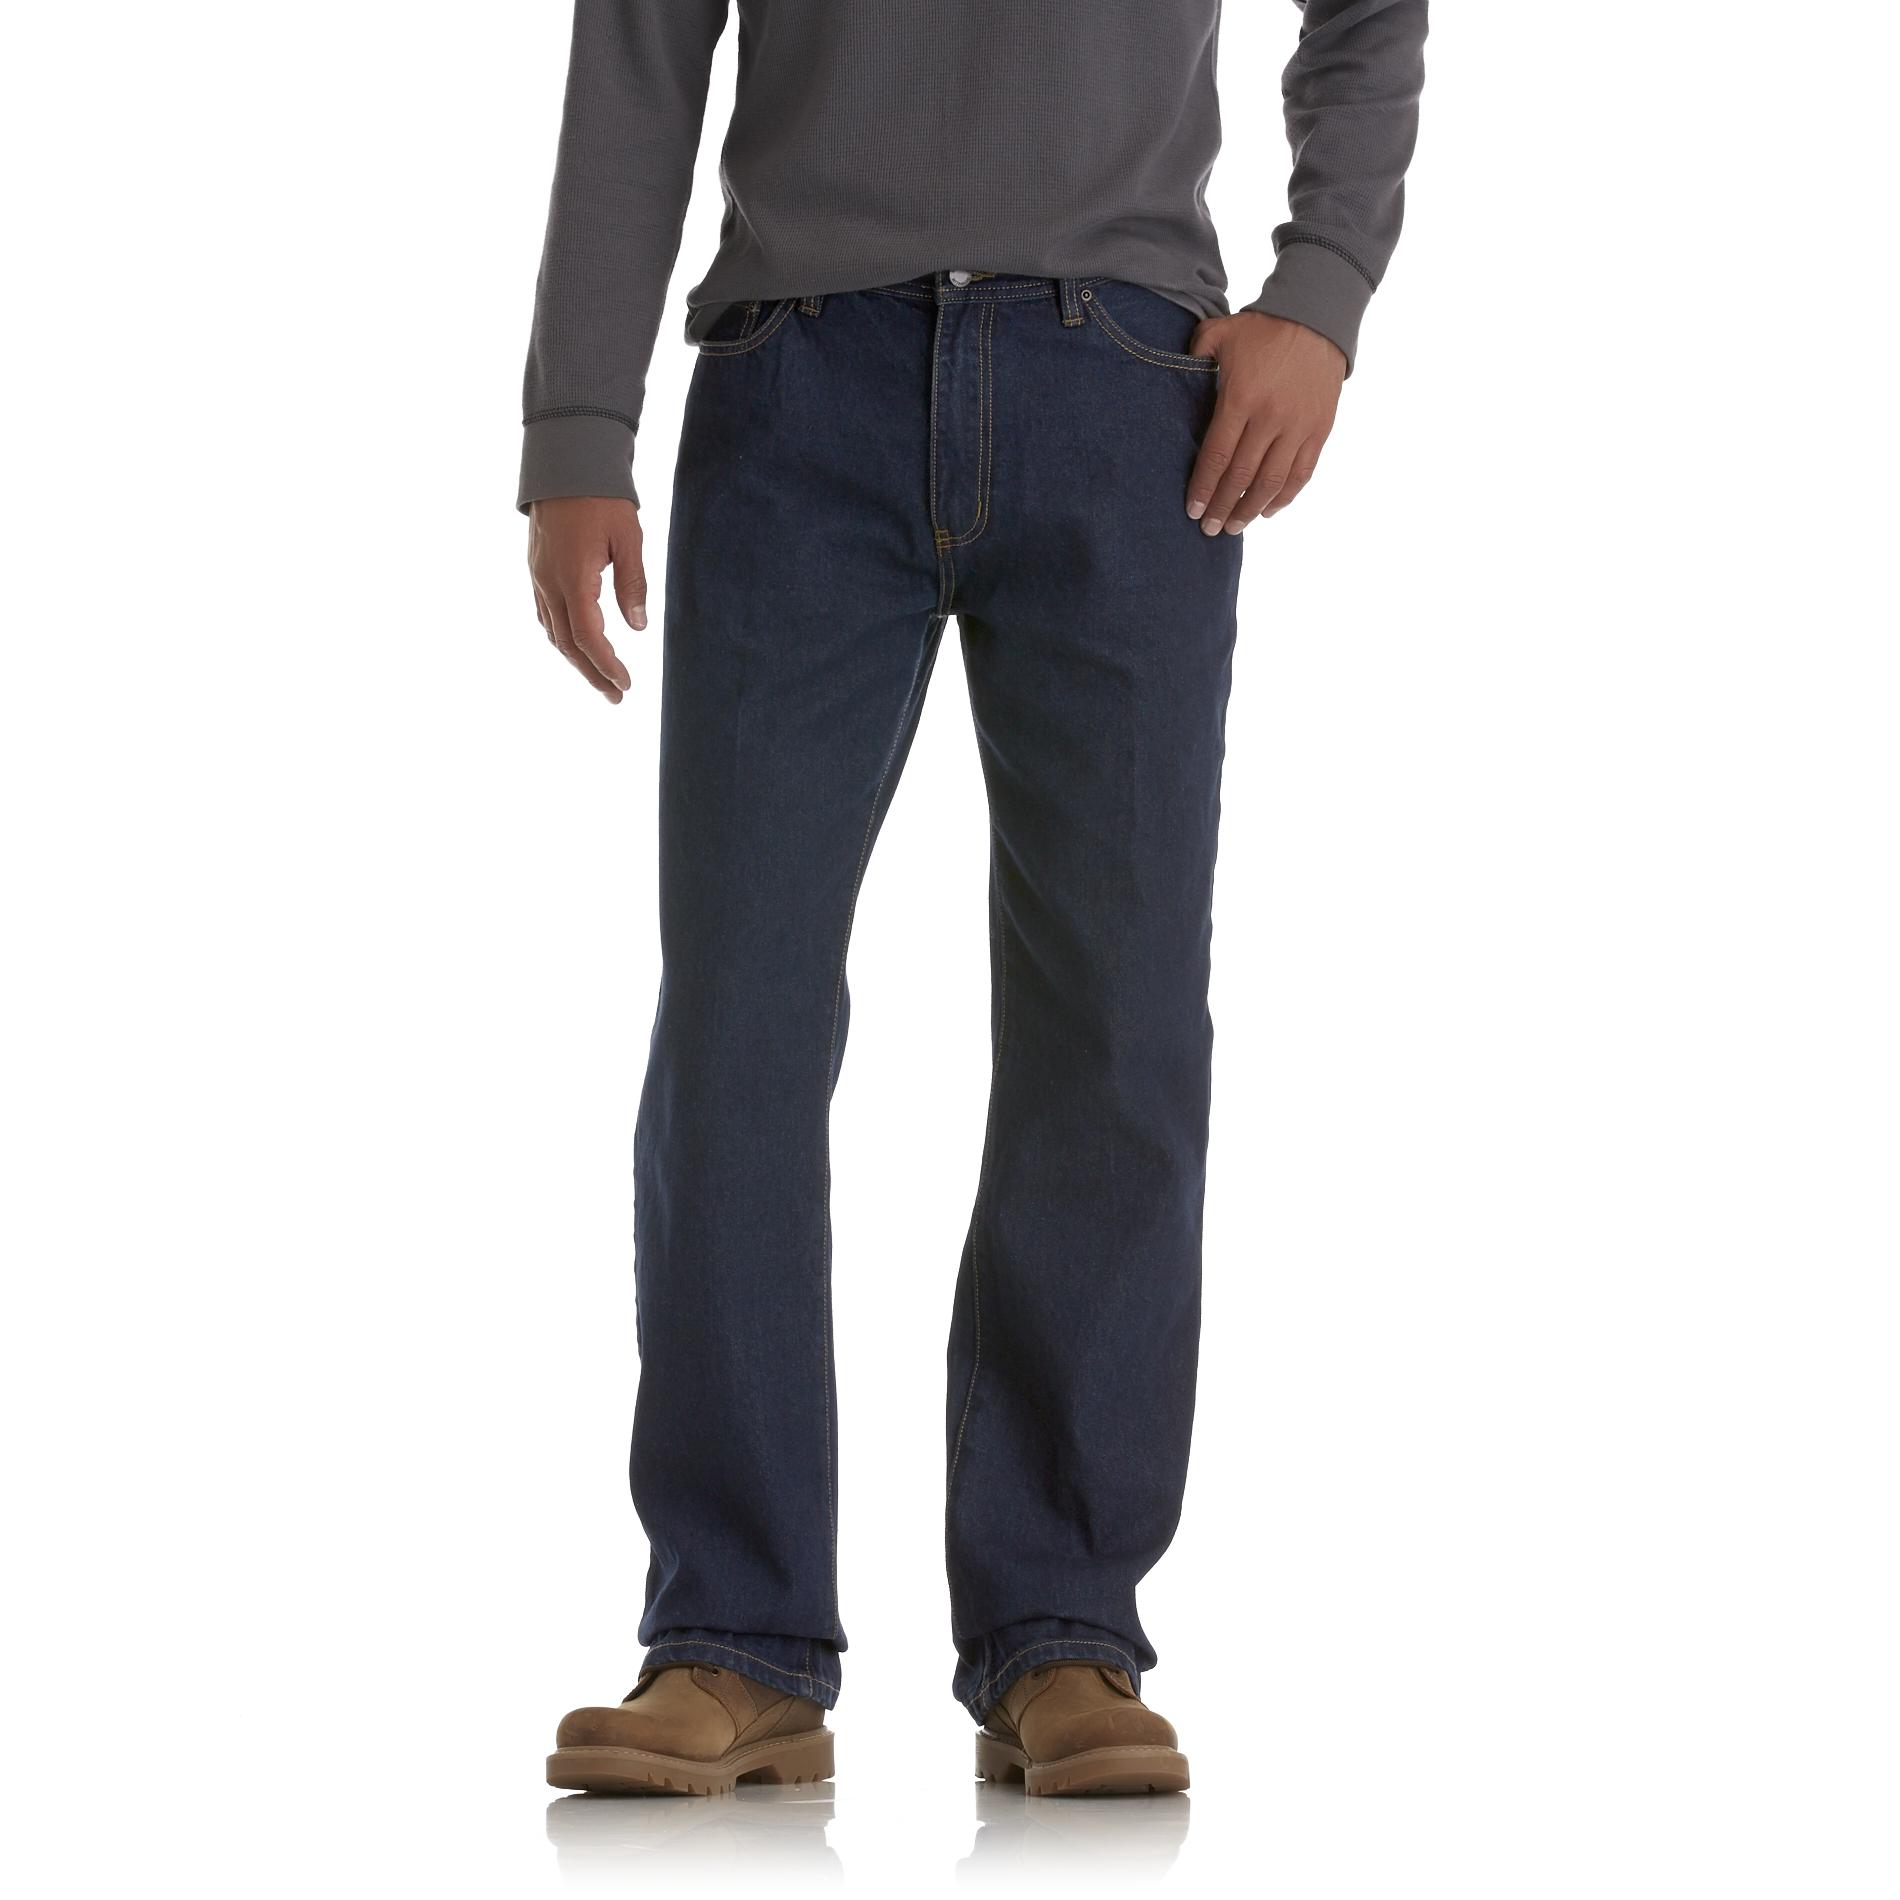 Outdoor Life Men's Relaxed-Fit Jeans